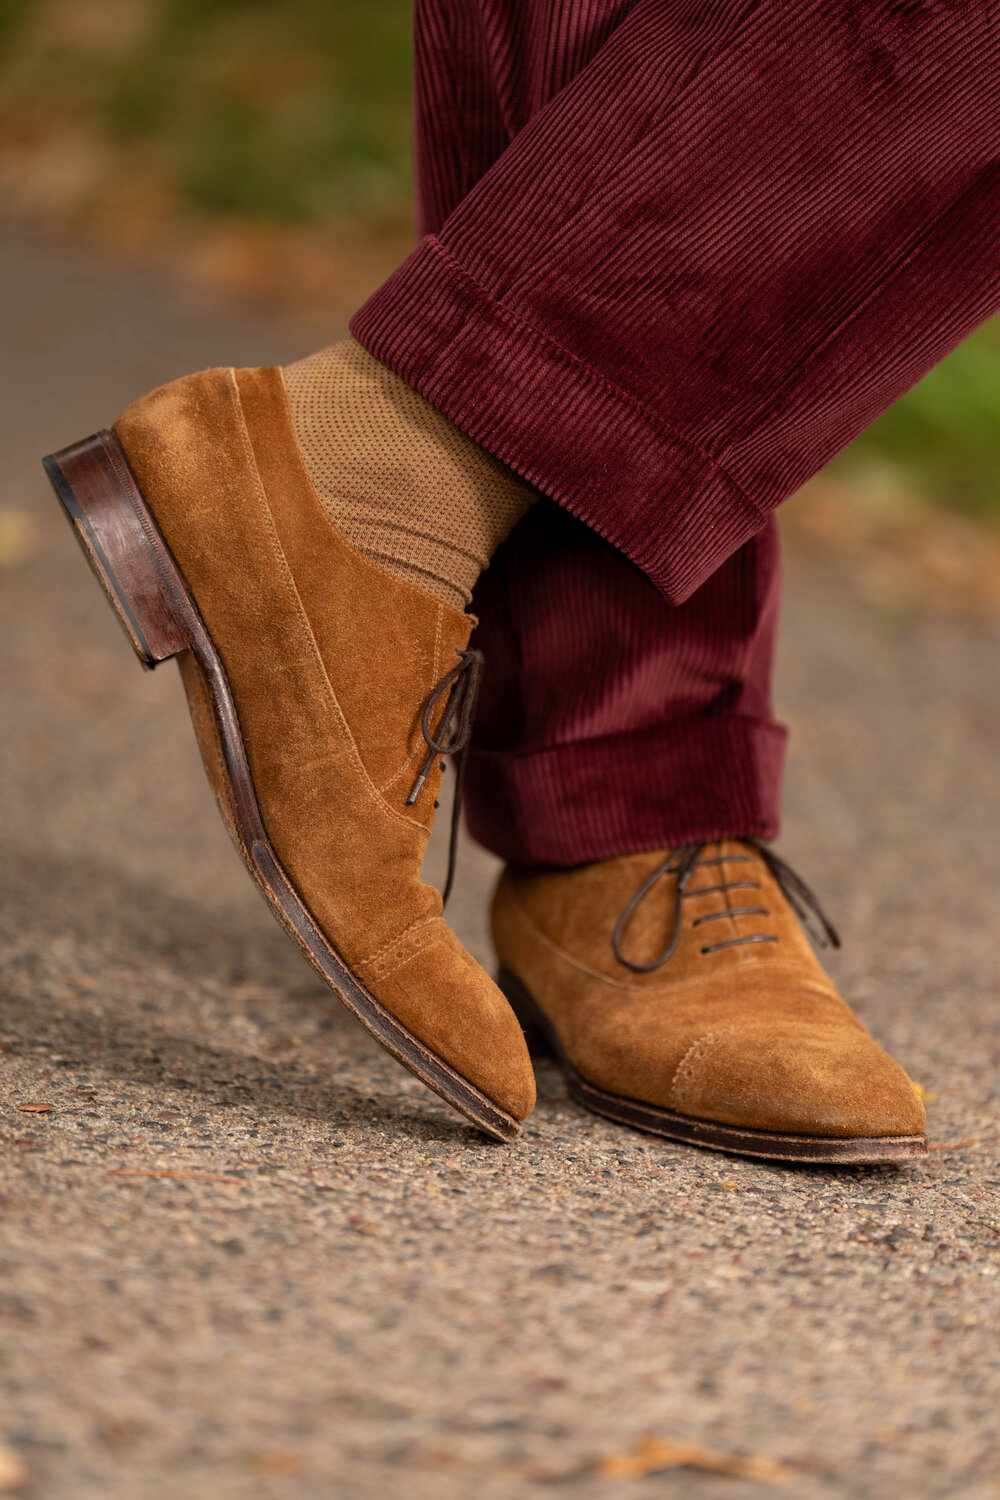 Maroon corduroy with Khaki and Dark Red Two Tone Solid Oxford Socks-_R5_9106